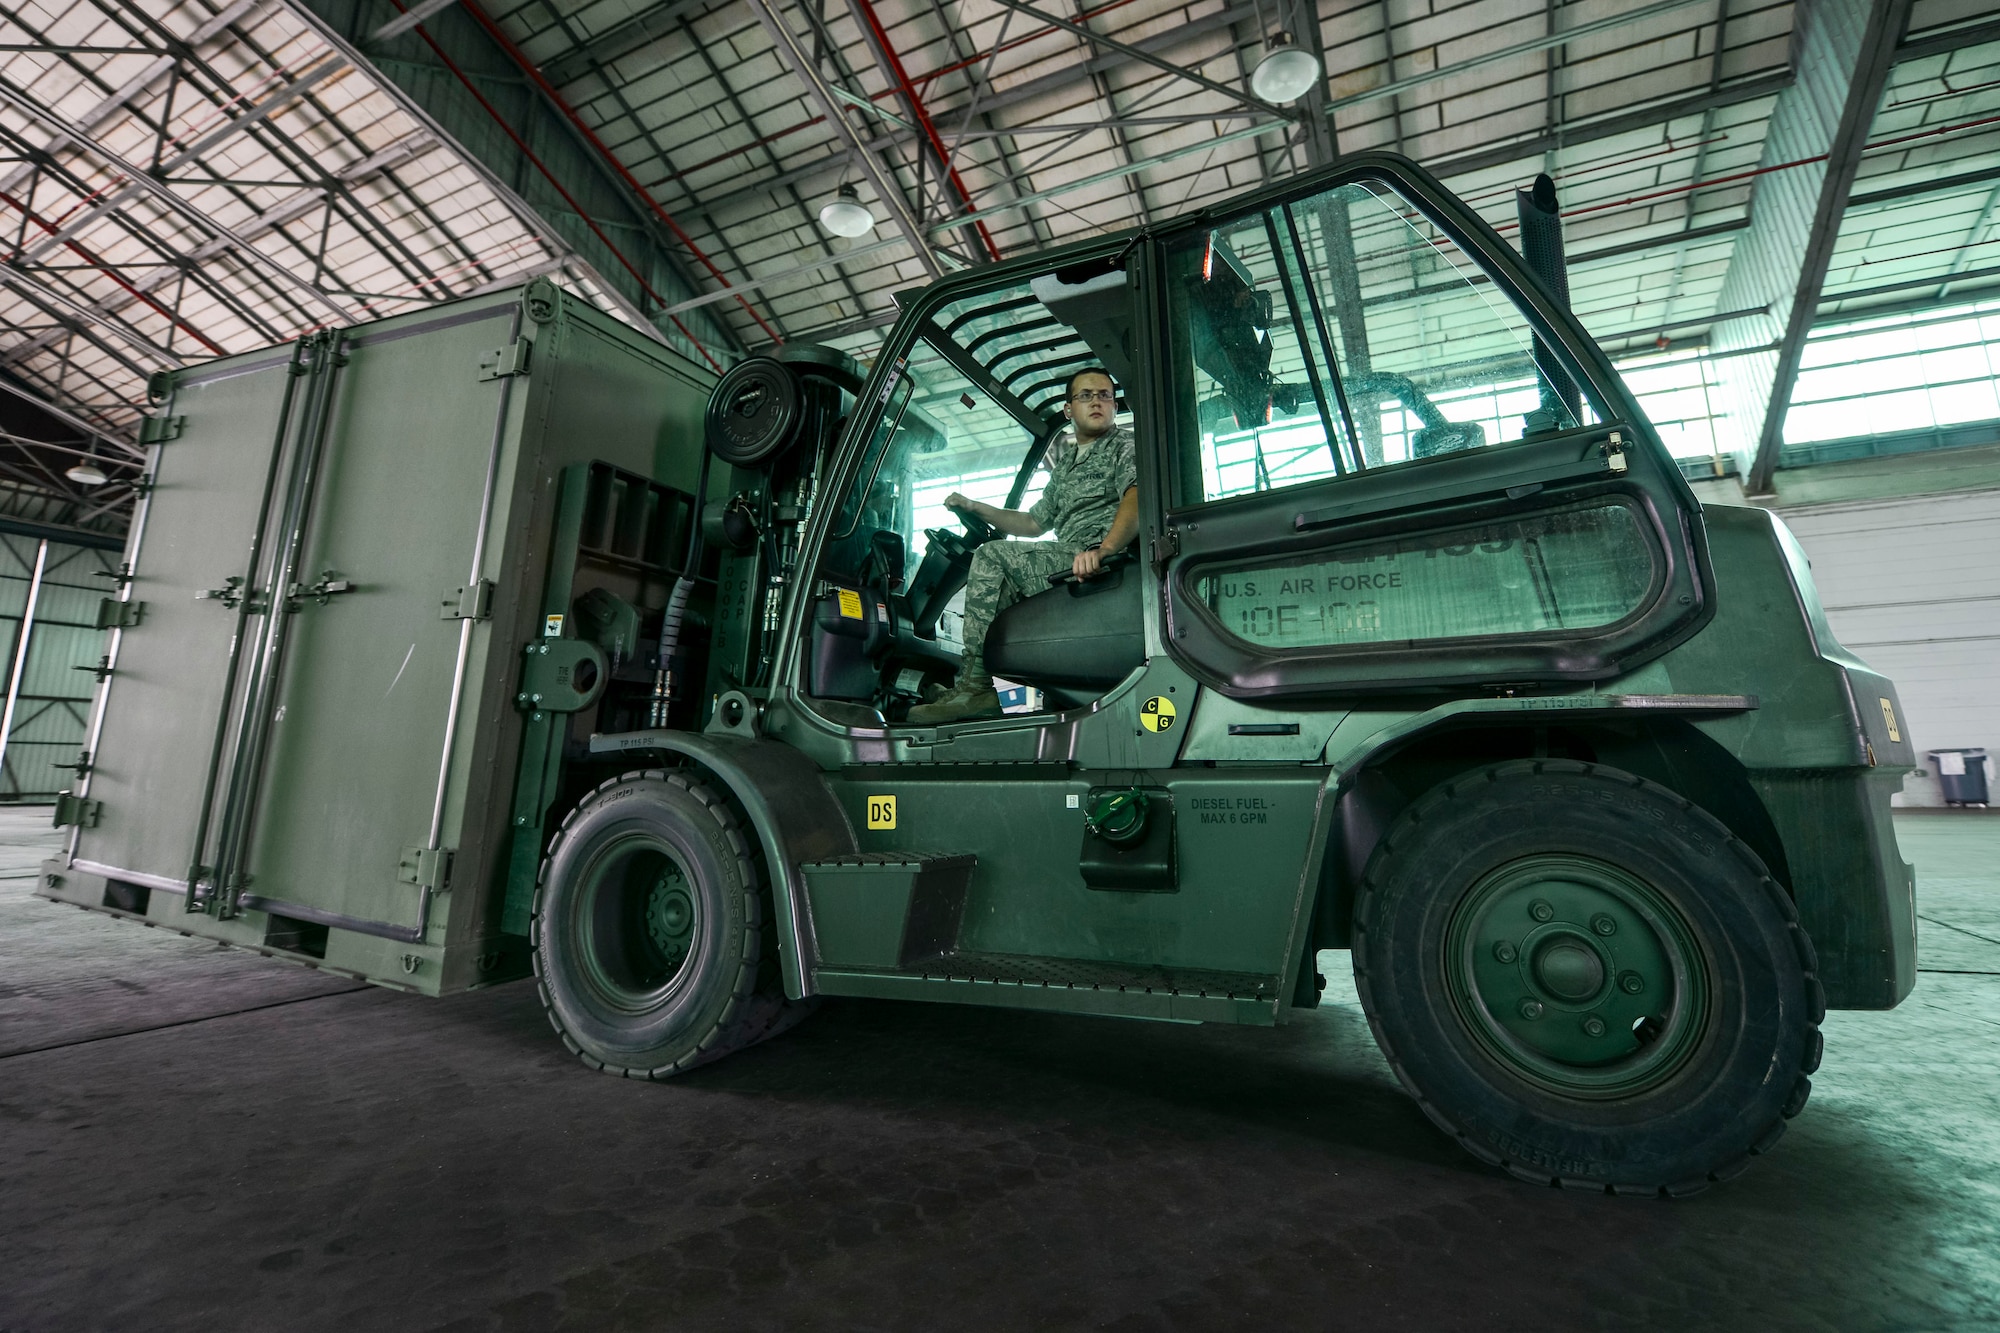 U.S. Air Force Staff Sgt. Robert Nine, assigned to the 169th Communications Flight, drives a 10k standard forklift during forklift driver training at the Combat Readiness Training Center in Savanah, Ga., July 16, 2014. Nine and more than 180 Airmen from the 169th Fighter Wing, traveled to the CRTC to conduct their annual training. The CRTC offered the Airmen a place to train and complete yearly ancillary training away from their home station.  (U.S. Air National Guard photo by Tech. Sgt. Jorge Intriago/Released)